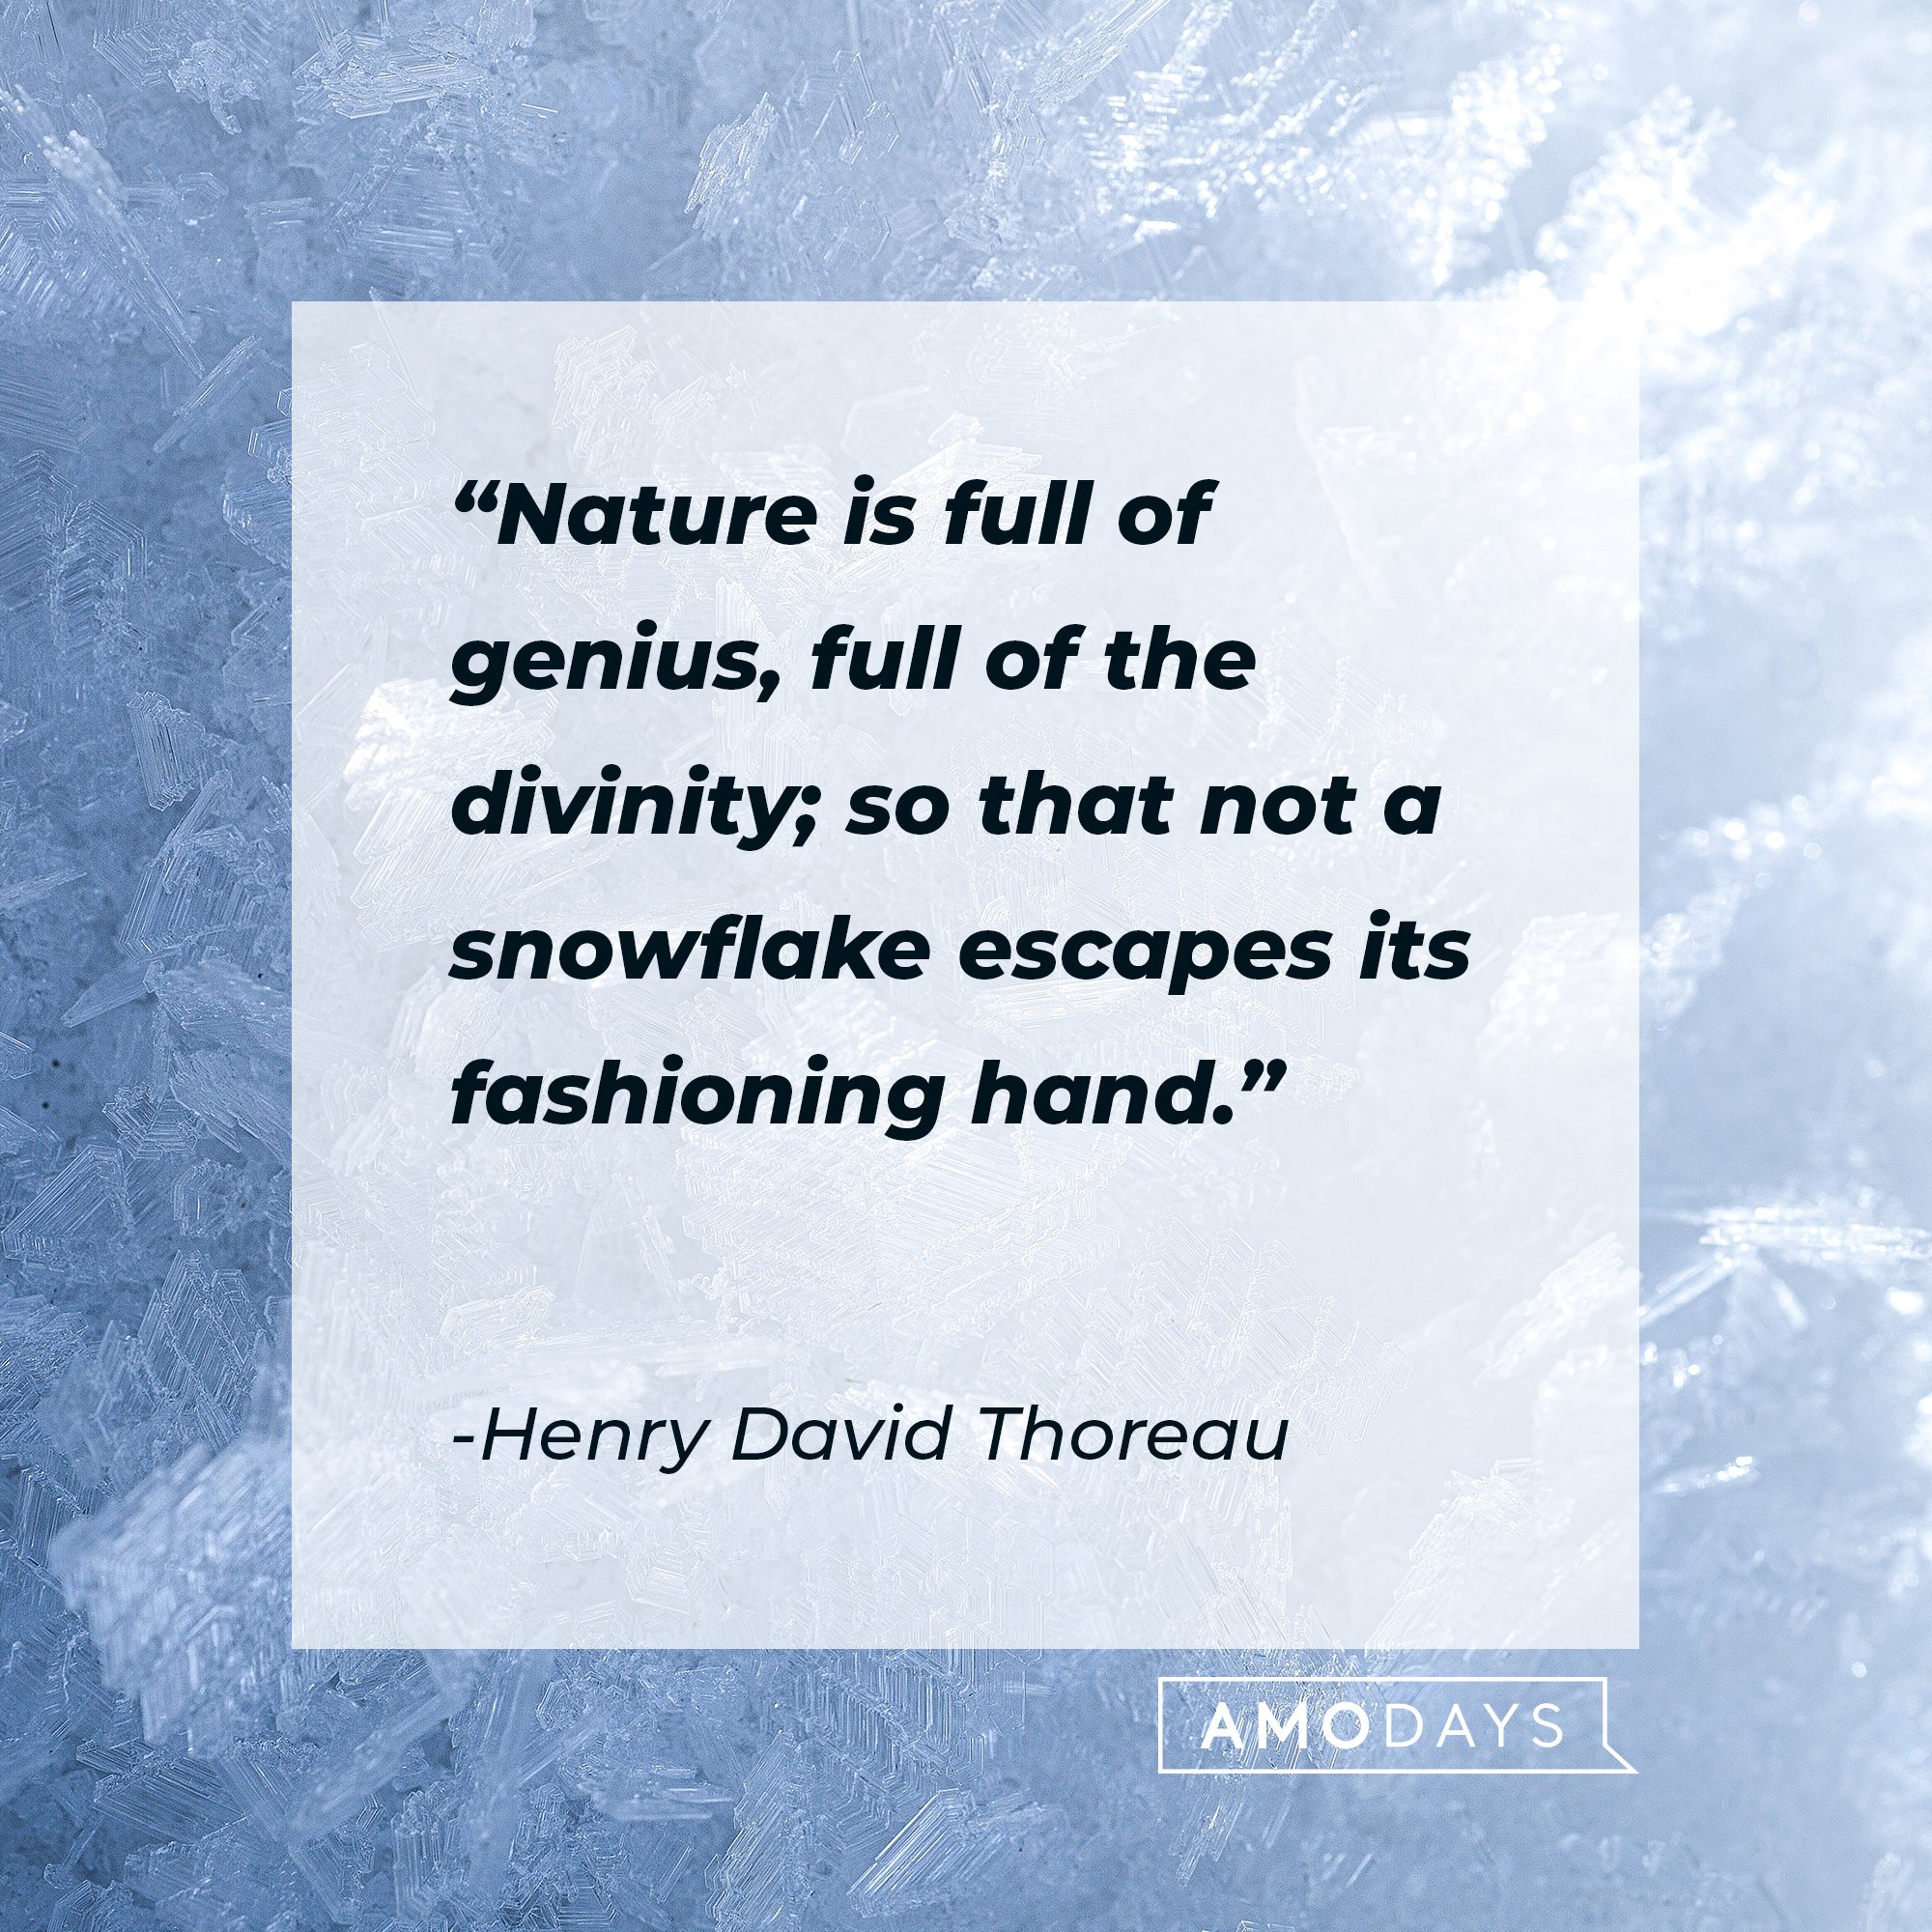  Henry David Thoreau’s quote: "Nature is full of genius, full of the divinity; so that not a snowflake escapes its fashioning hand." | Image: AmoDays